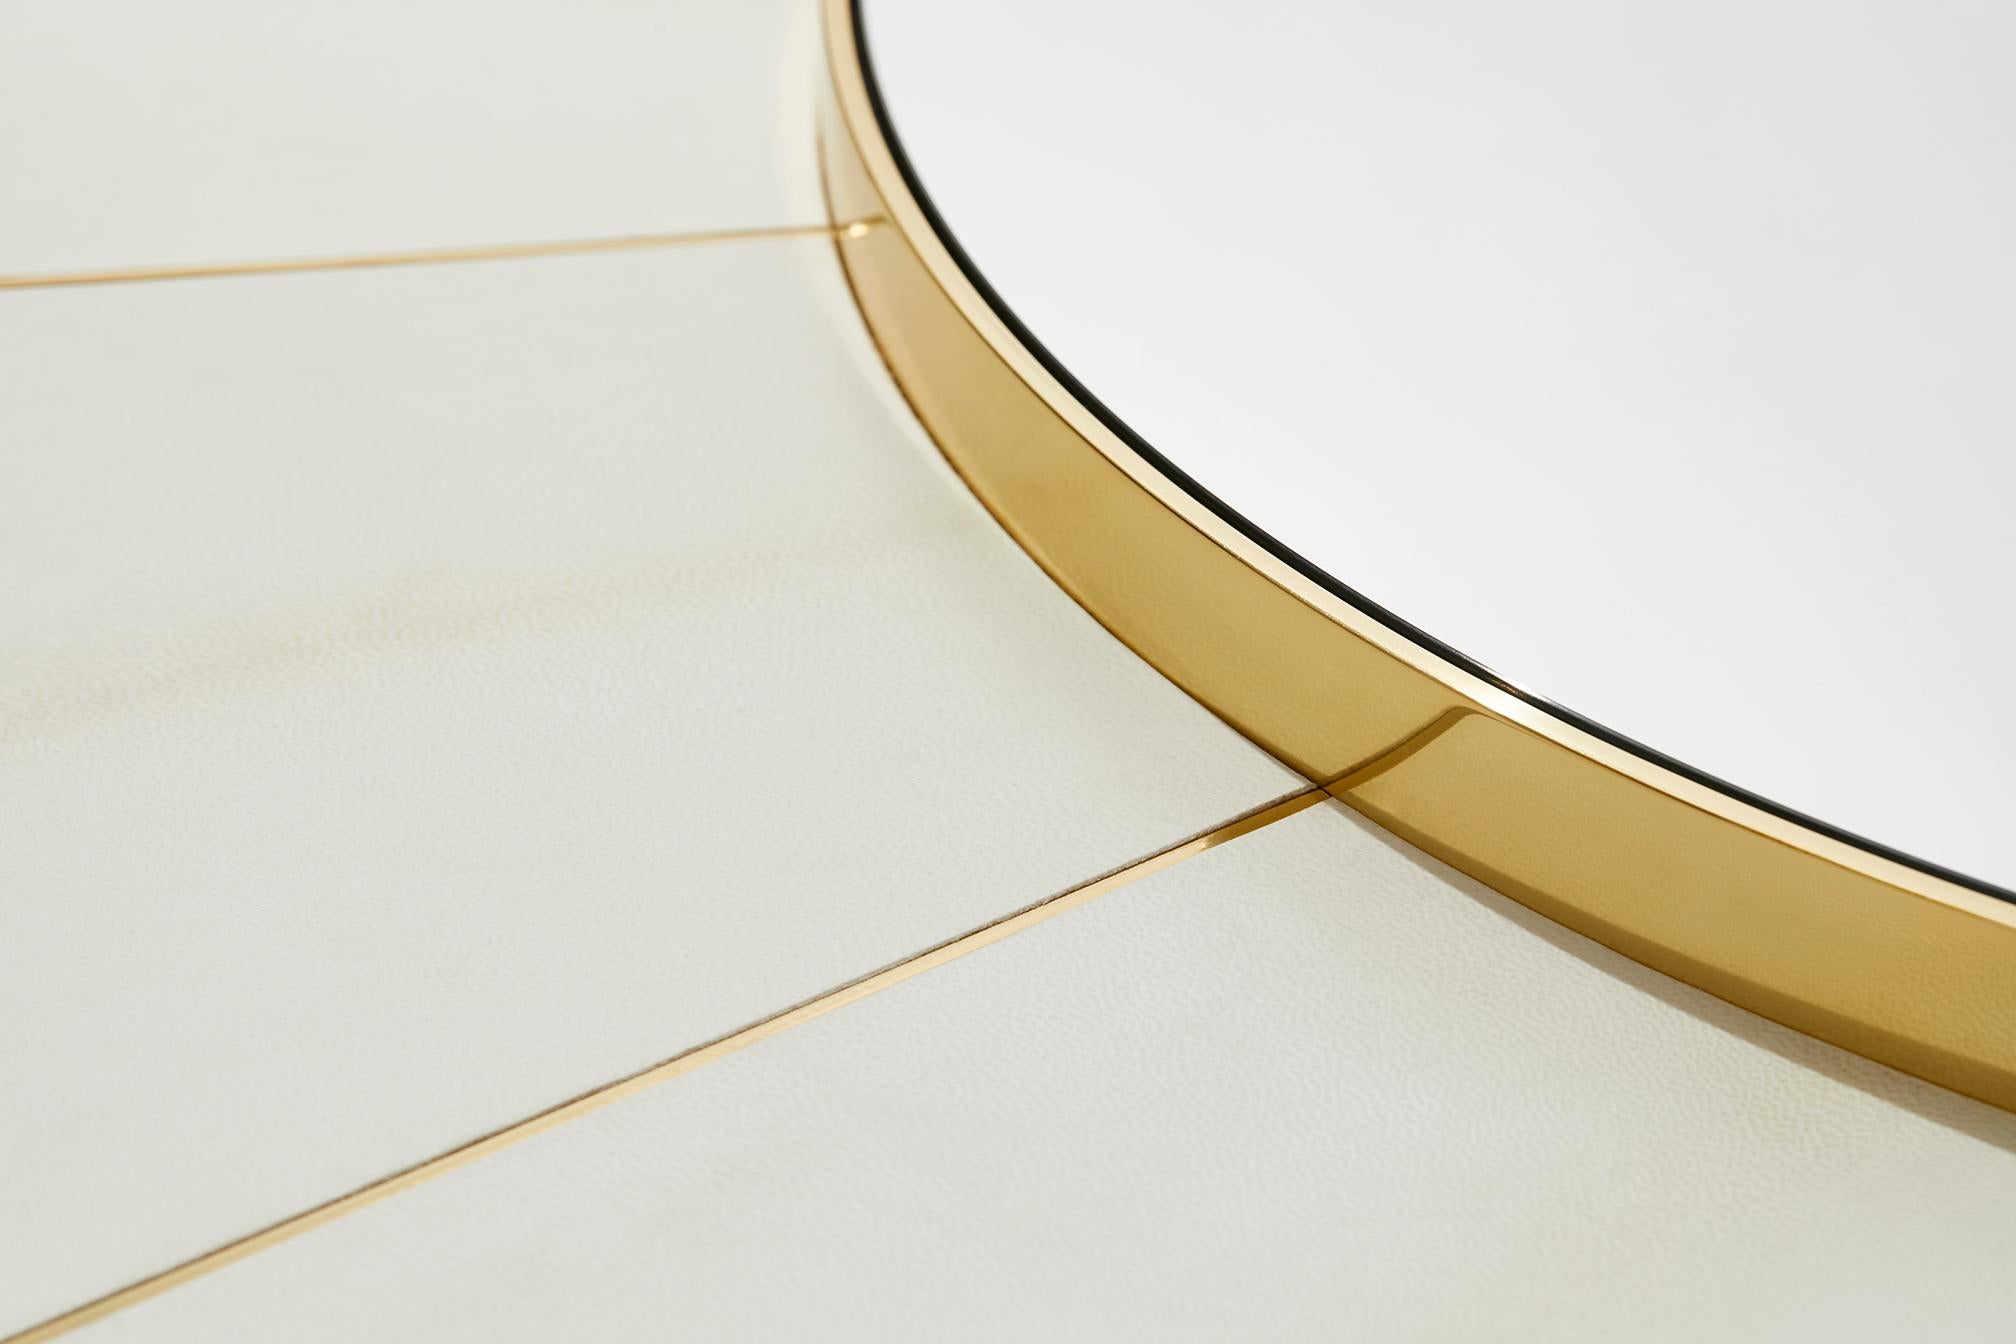 Saint Germain mirror in parchment and polished brass is a unique piece designed by Hervé Langlais for Galerie Negropontes in Paris, France.

Hervé Langlais is a graduate of the Normandy School of Architecture in Rouen. He collaborated with Paul